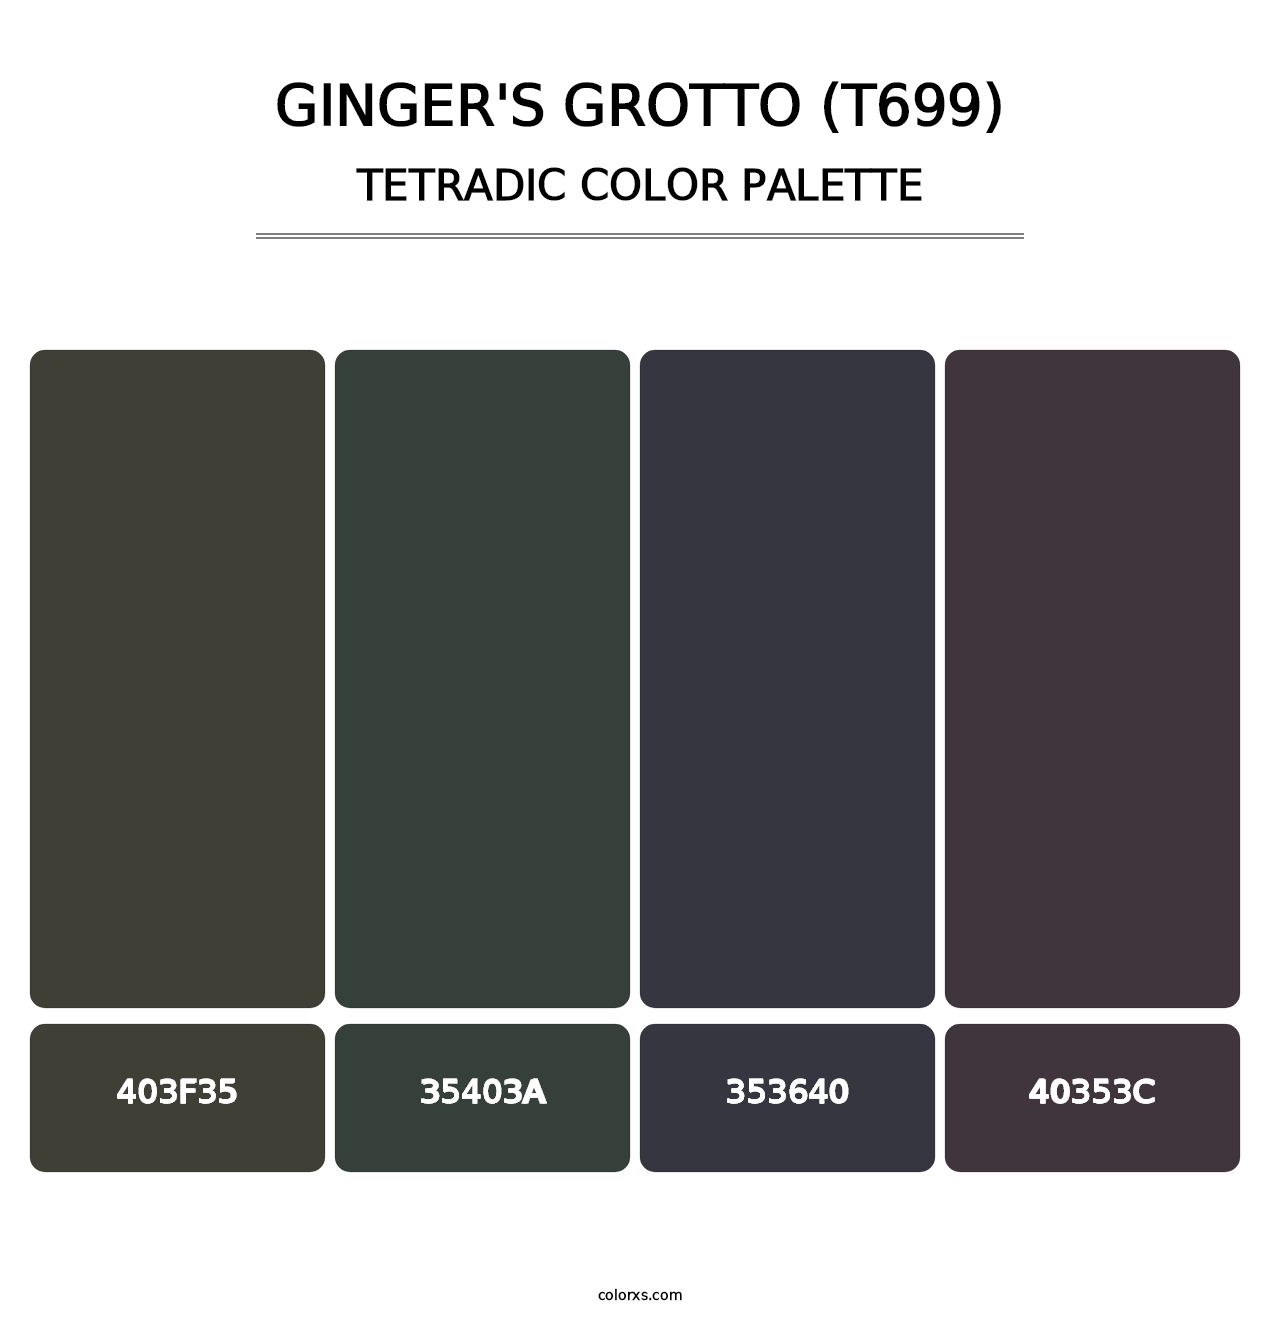 Ginger's Grotto (T699) - Tetradic Color Palette